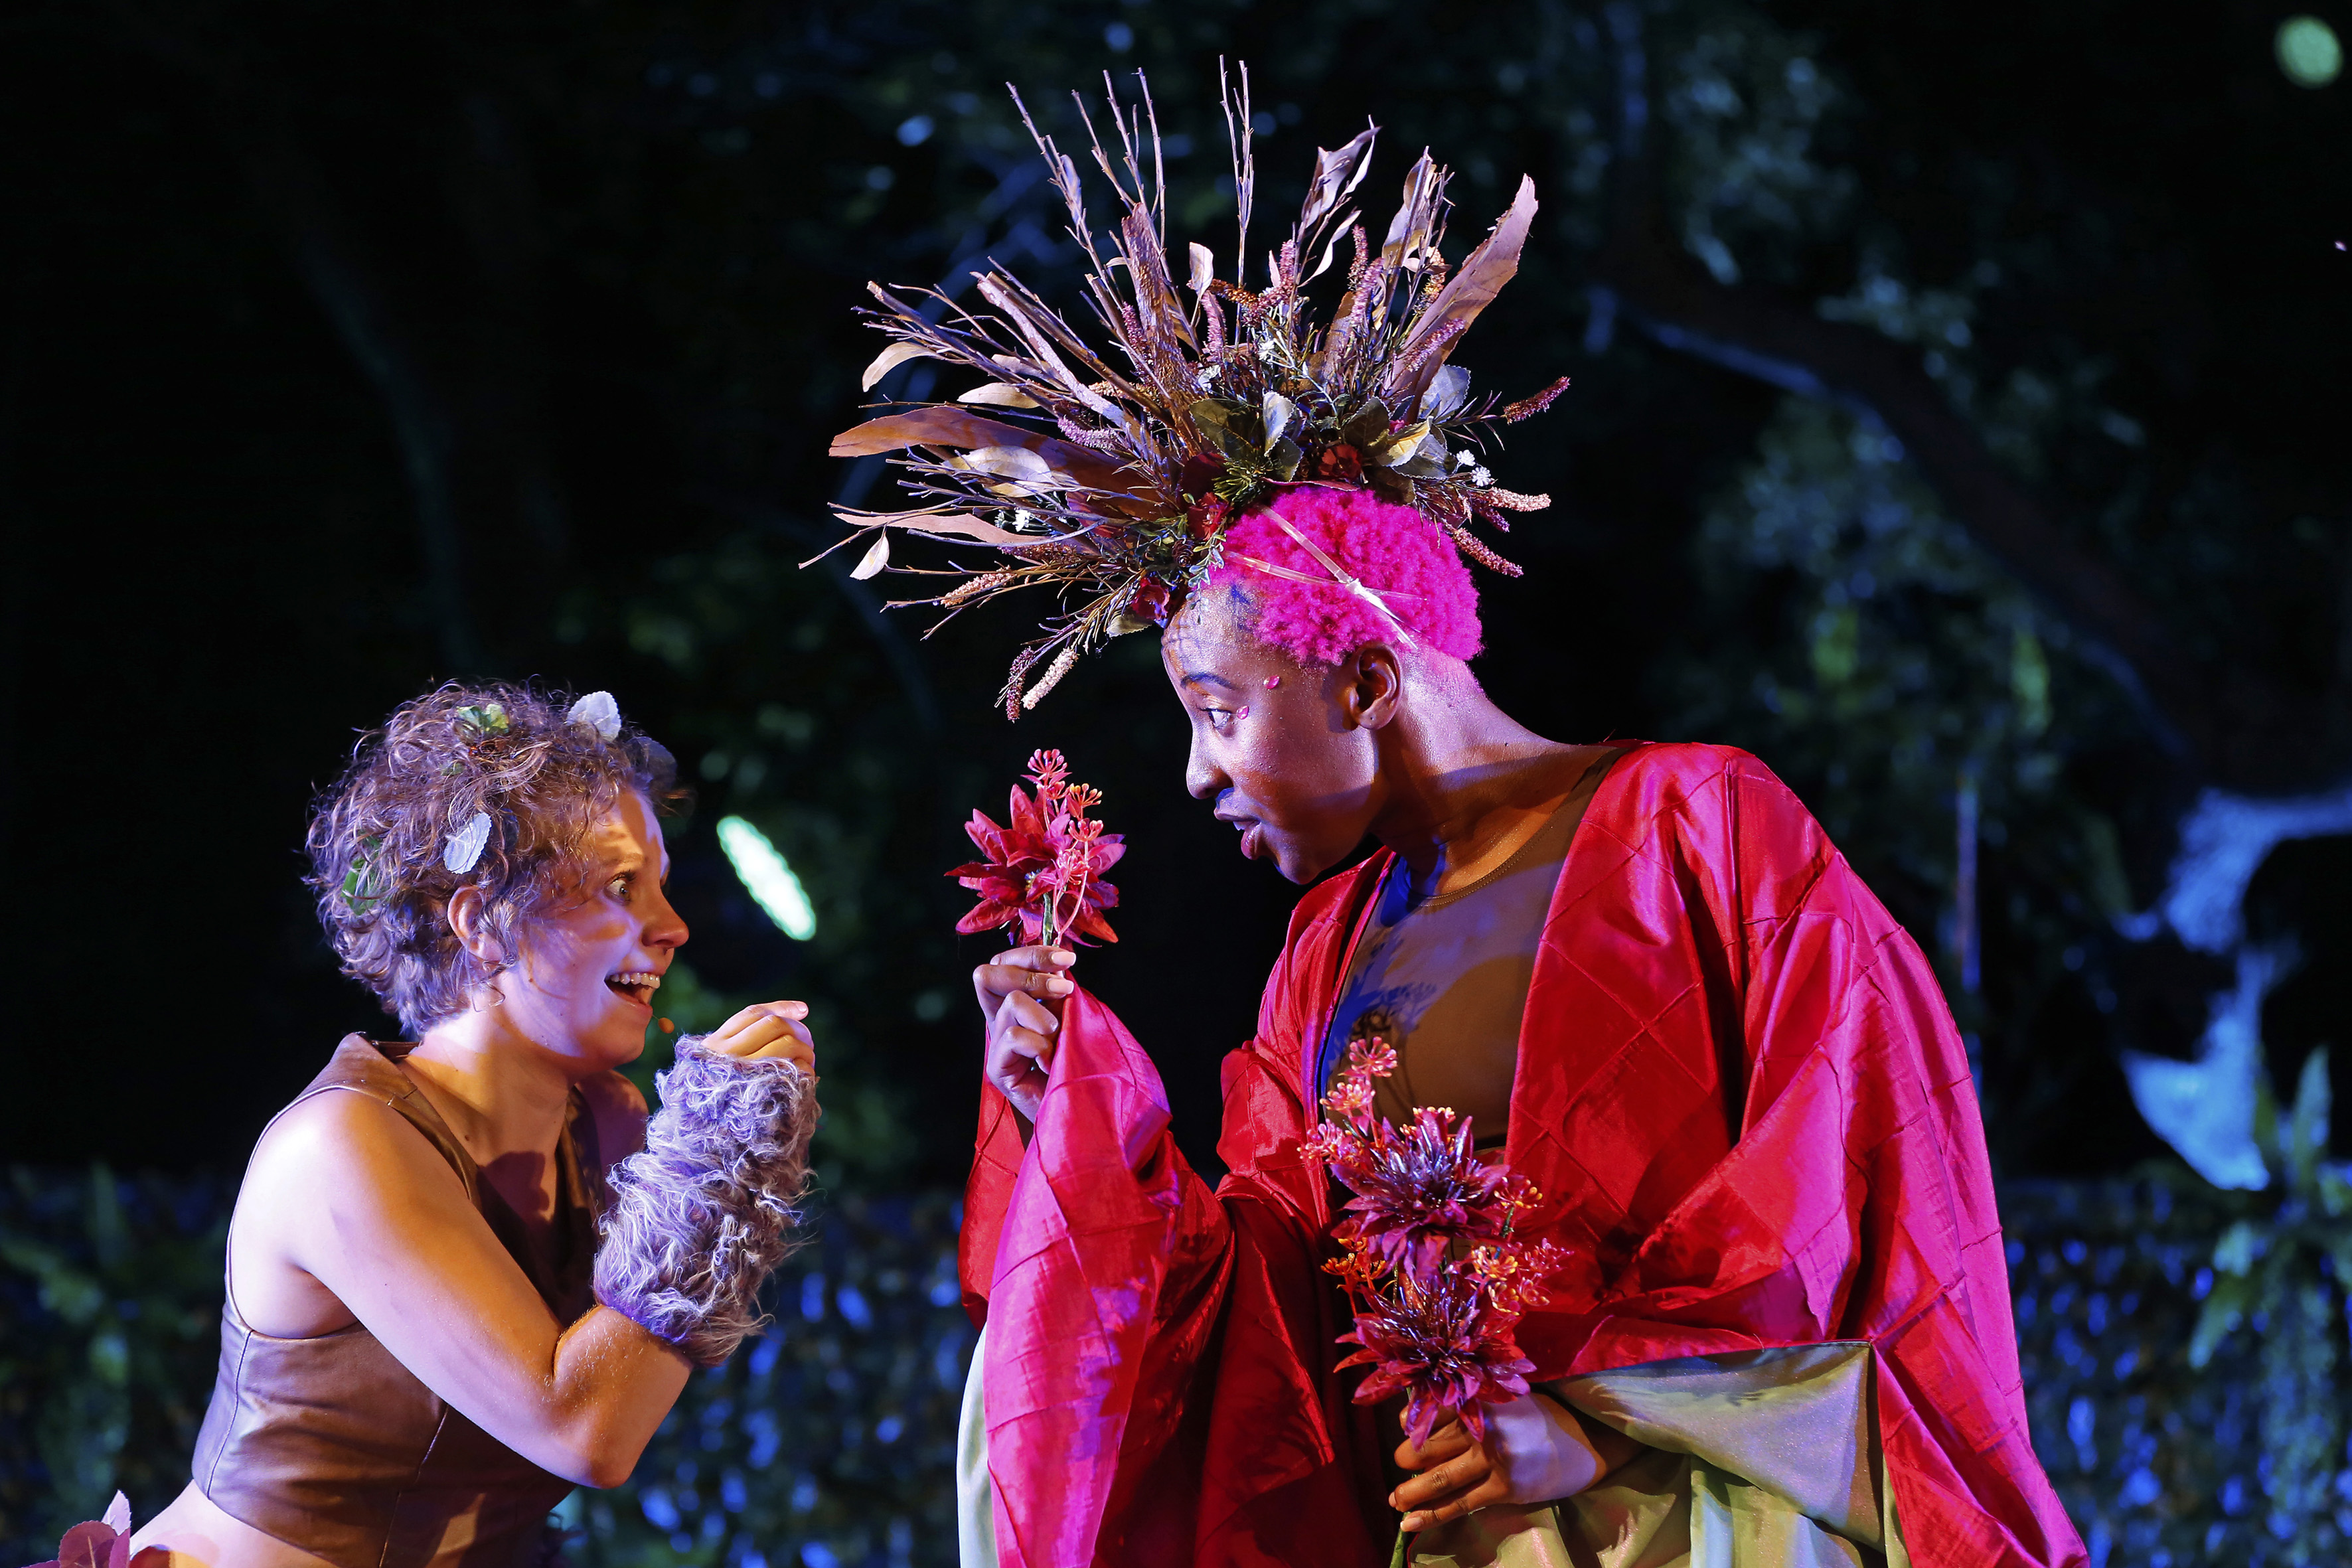 Puck (Sophie Joans) and Oberon (Chi Mhende) conspire in Shakespeare's 'A Midsummer Night's Dream' at Maynardville. Image: Mark Wessels